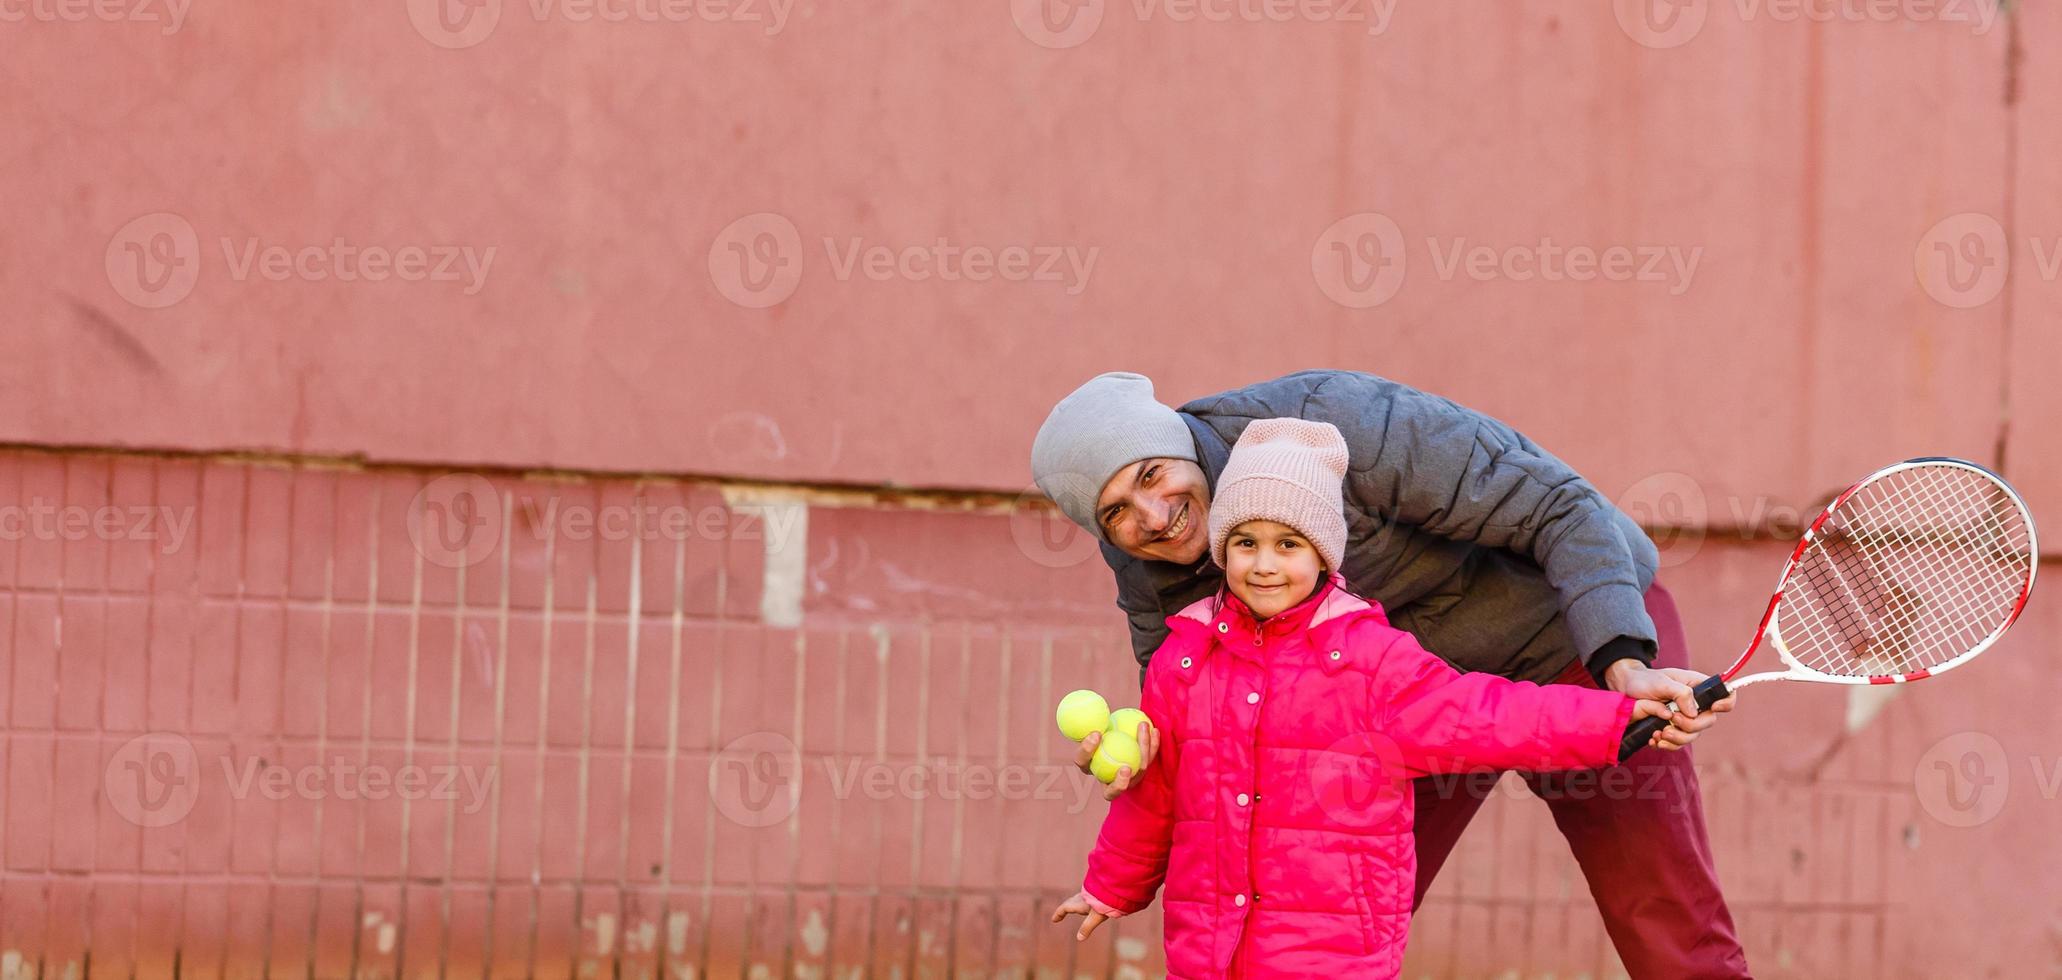 Active family playing tennis on court photo